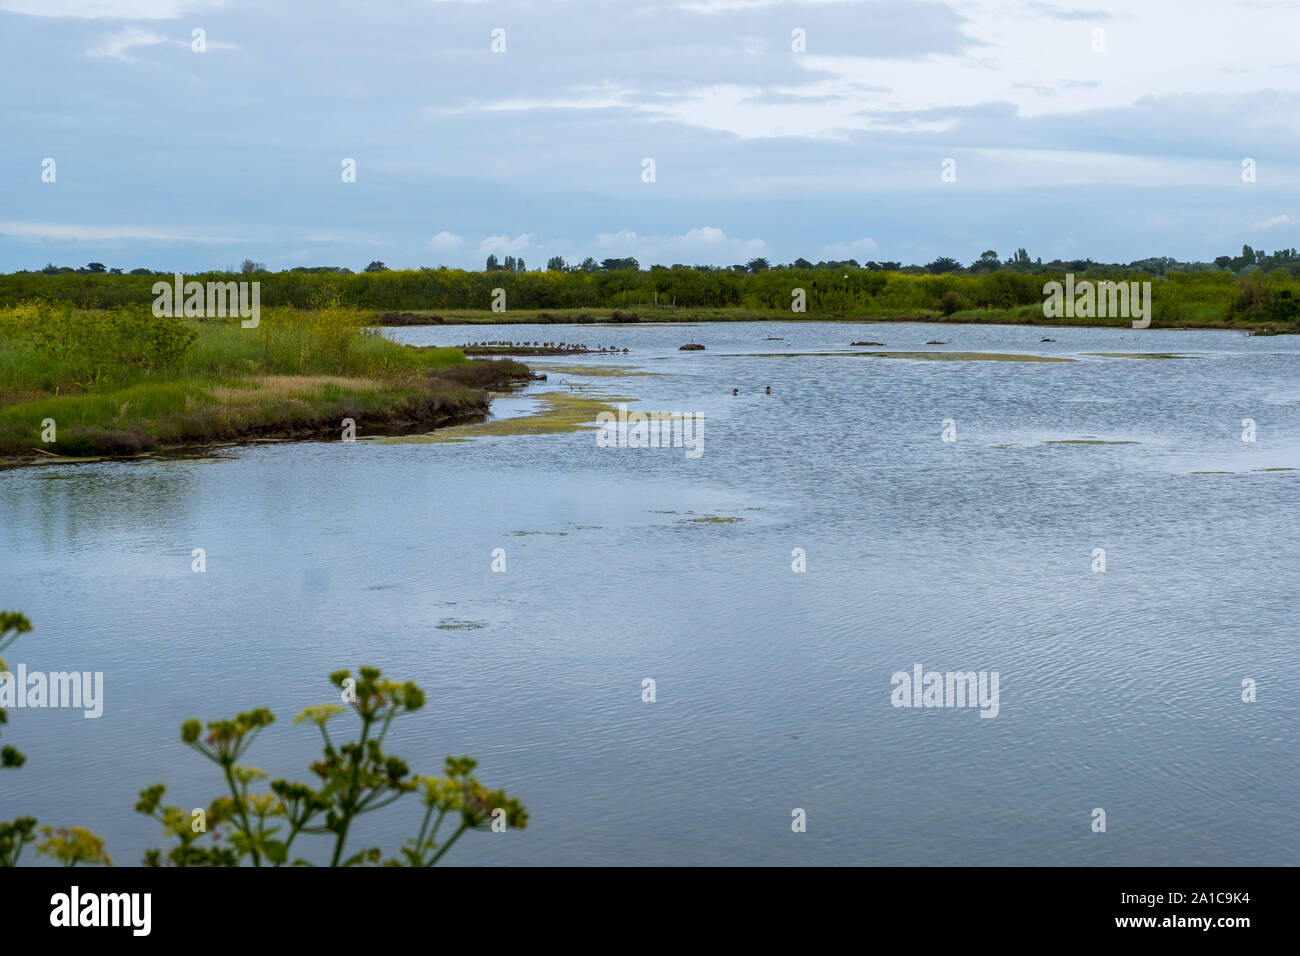 Lilleau des Niges National Nature Reserve of Ile de Re island in France Stock Photo